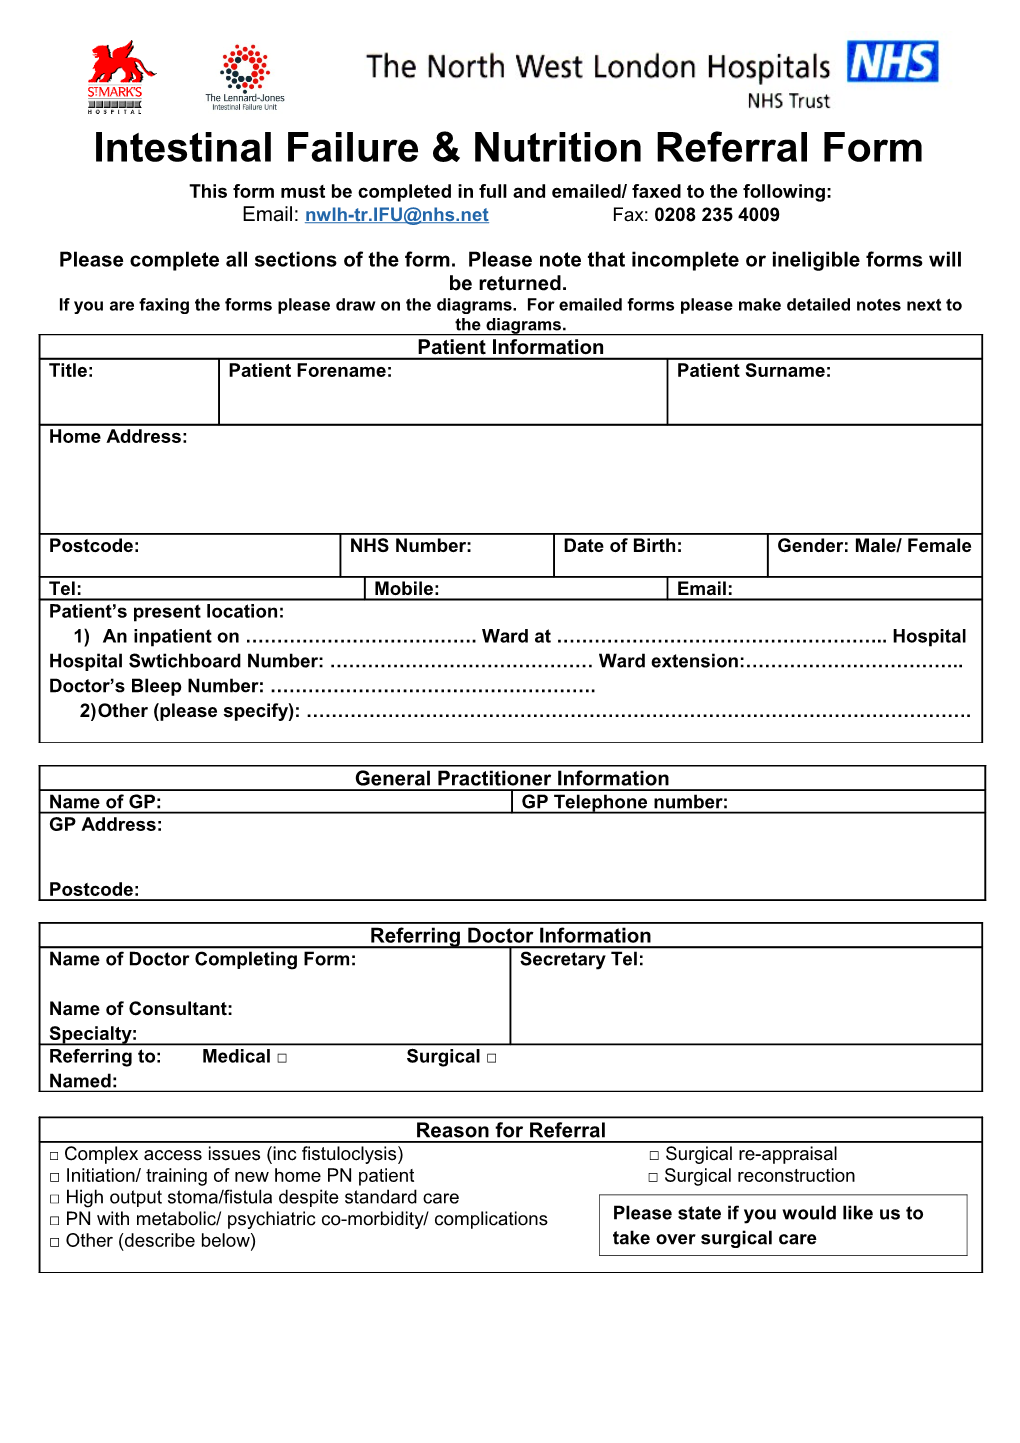 This Form Must Be Completed in Full and Emailed/ Faxed to the Following